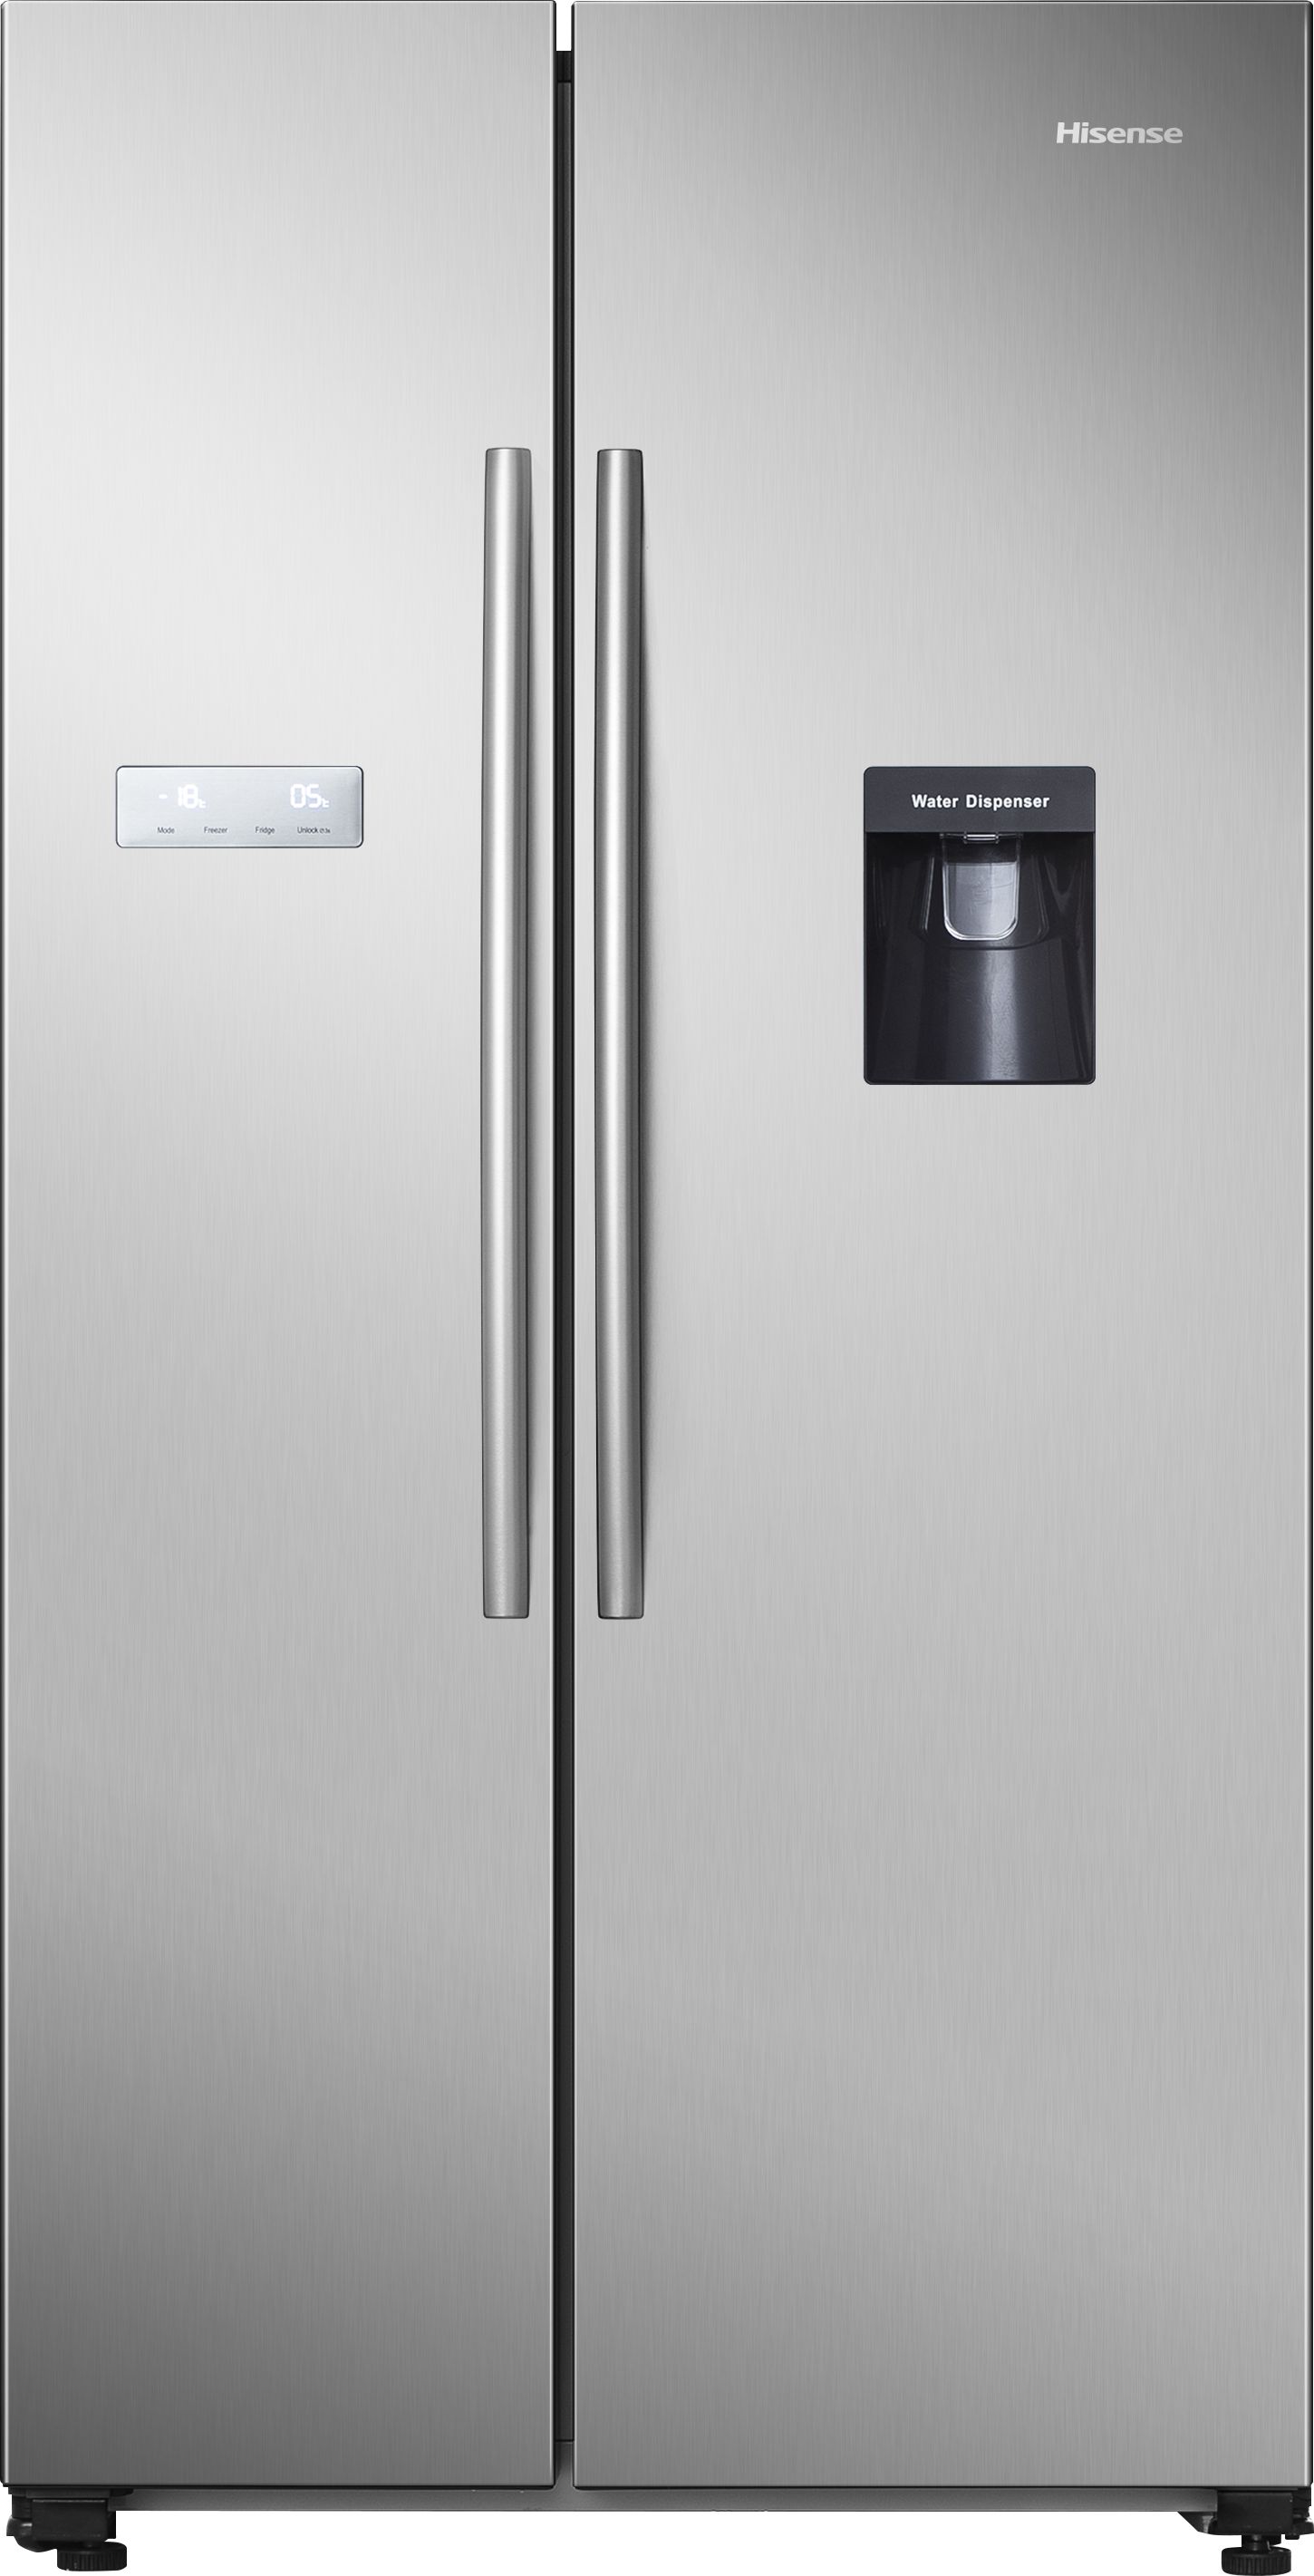 Hisense RS741N4WCE Non-Plumbed Total No Frost American Fridge Freezer - Stainless Steel - E Rated, Stainless Steel